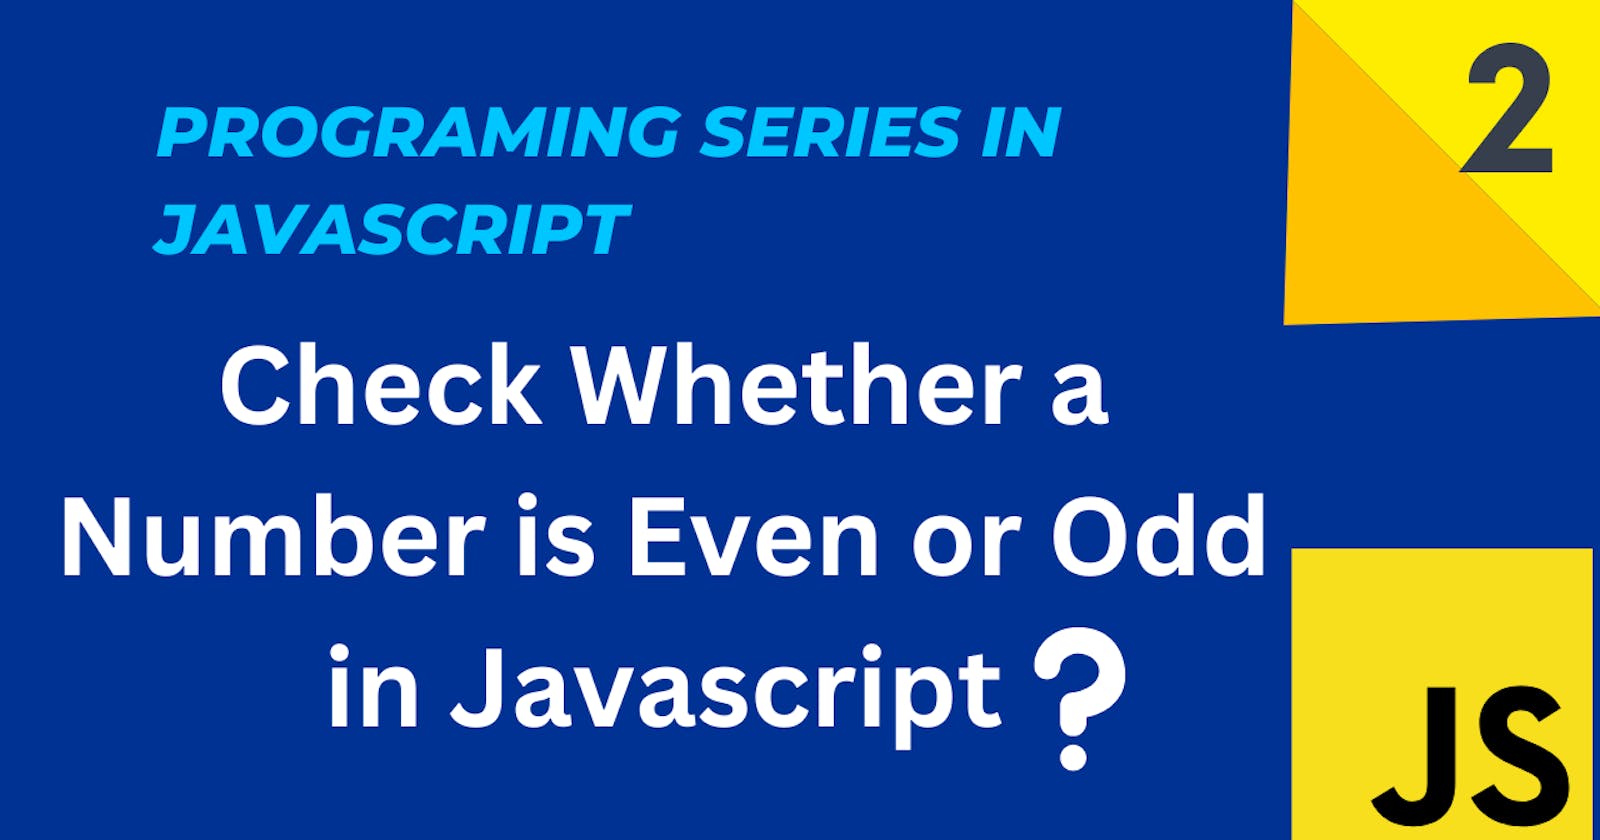 Check Whether a Number is Even or Odd in Javascript